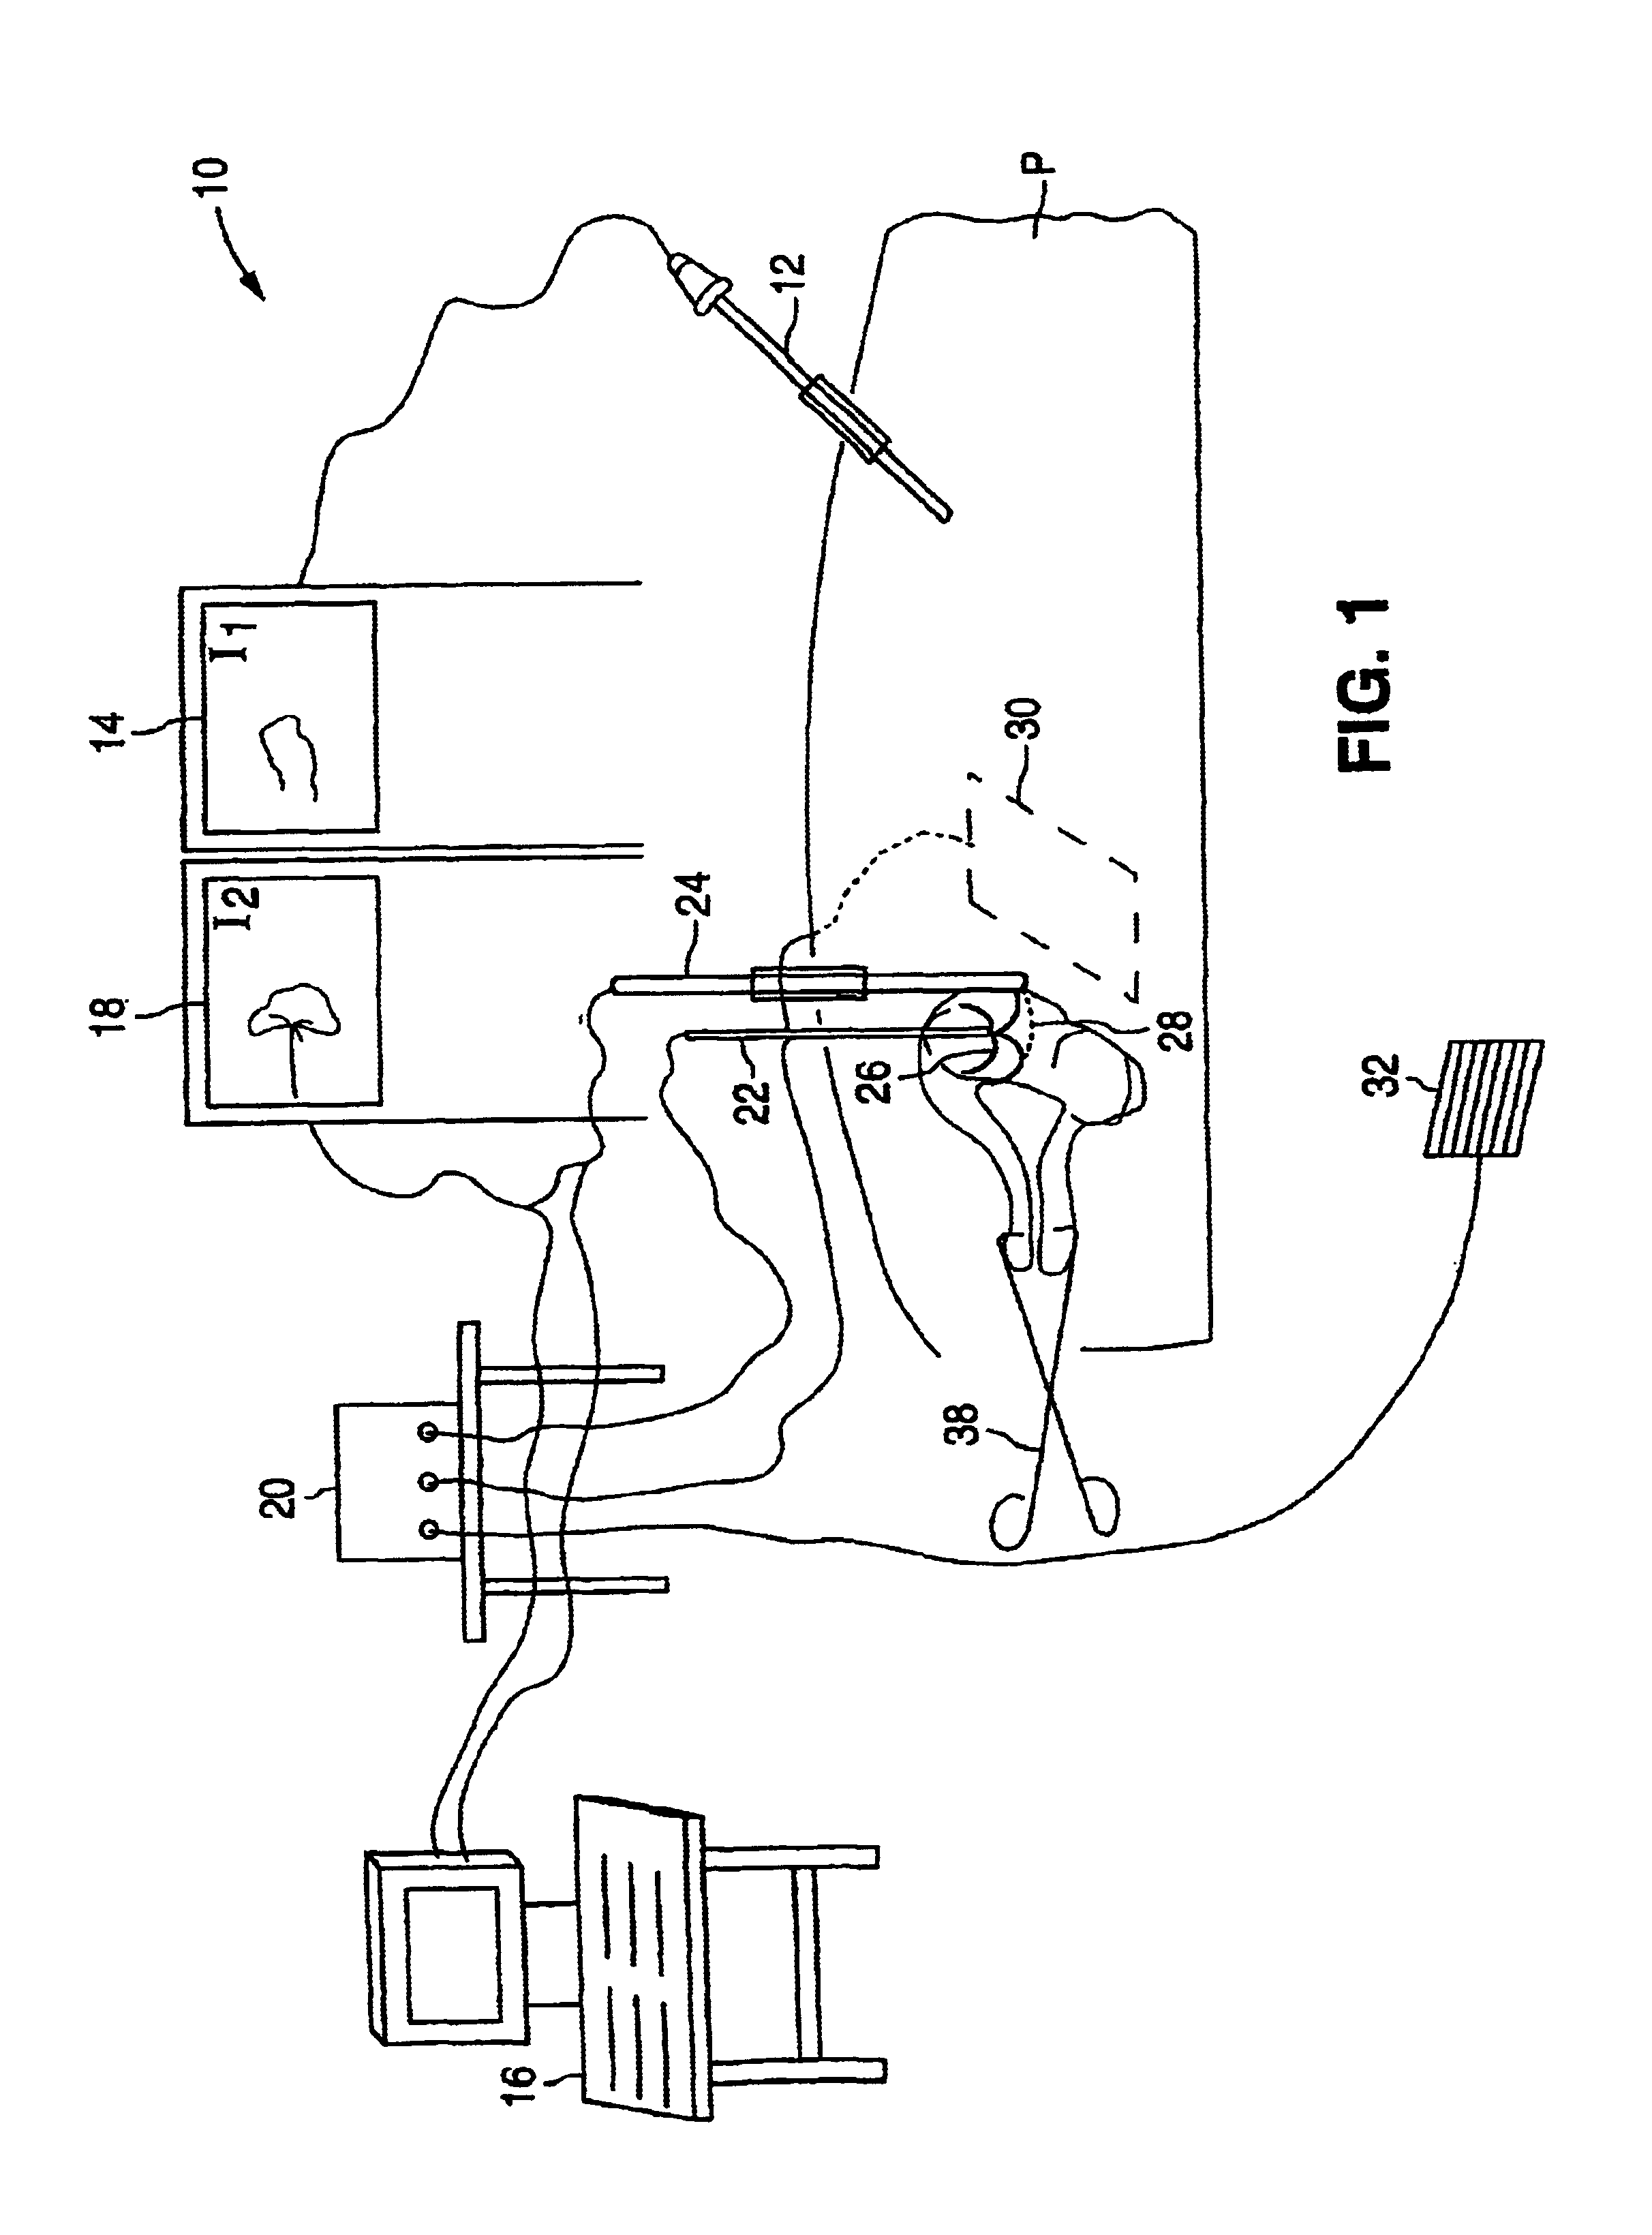 Gynecological ablation procedure and system using an ablation needle